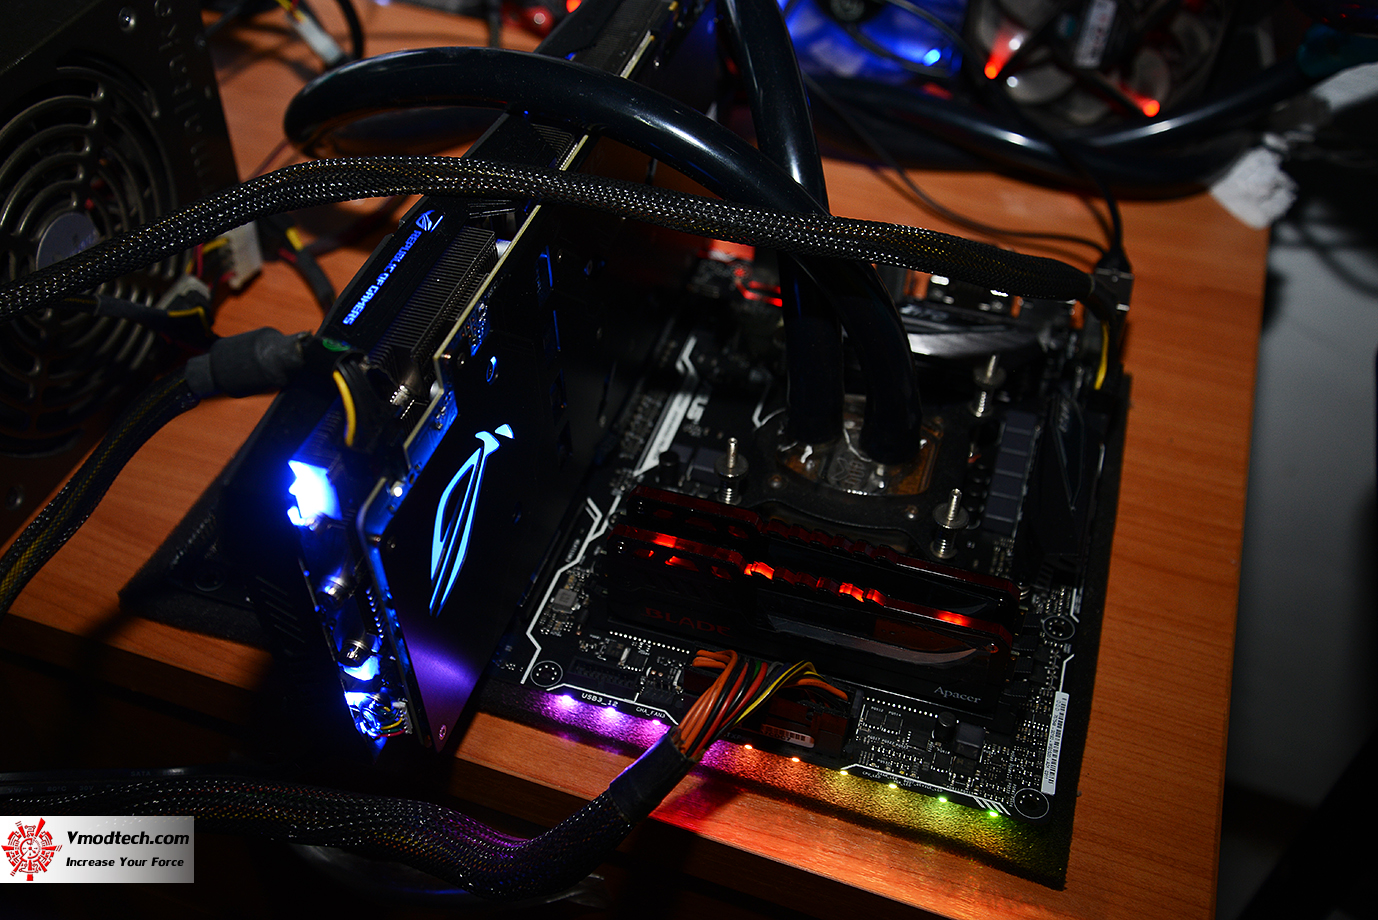 dsc 3196 ASUS Z170 PRO GAMING/AURA REVIEW